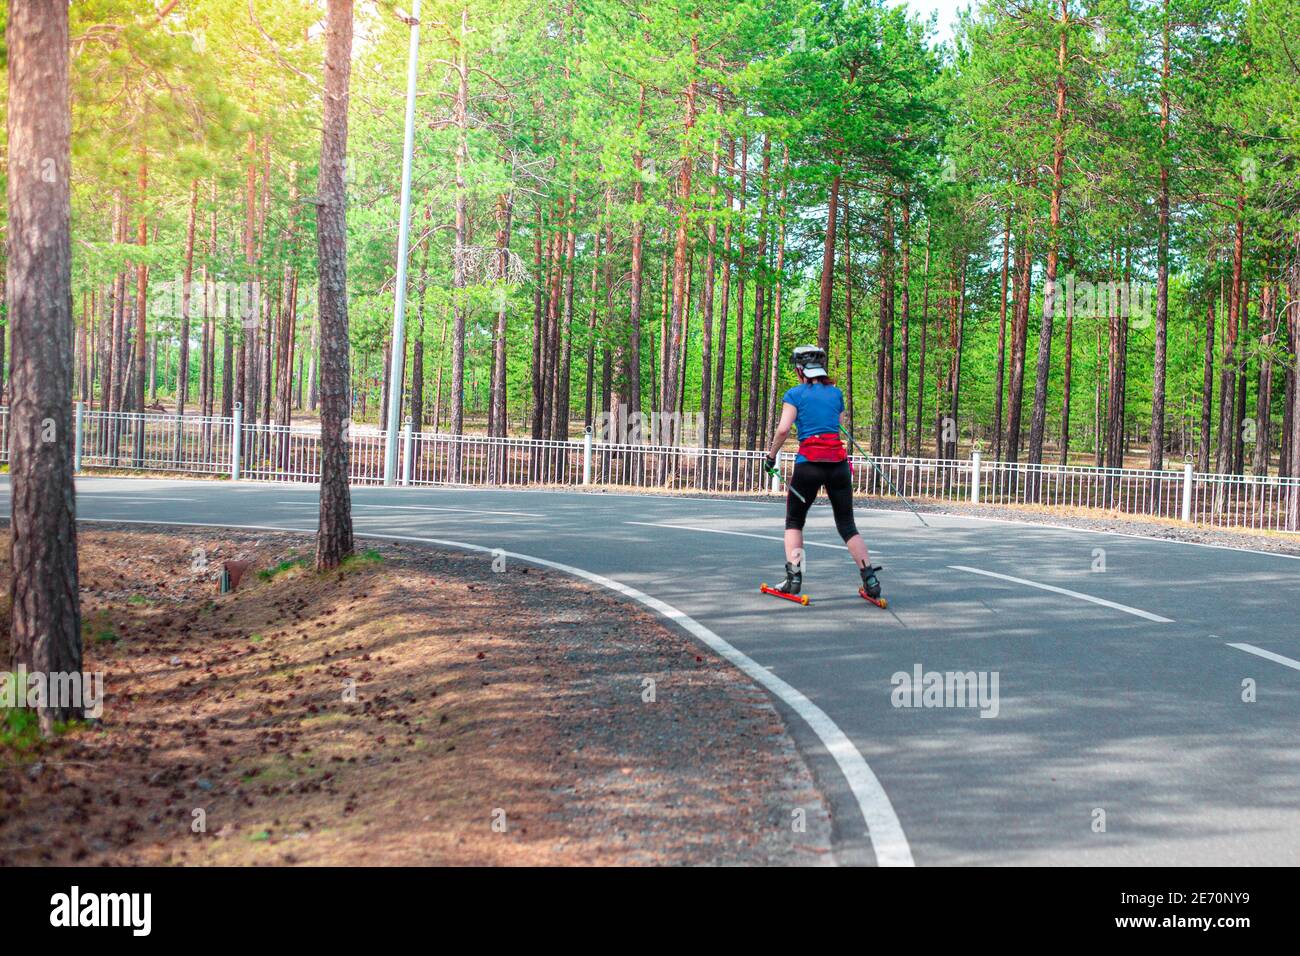 woman athlete is rolling down the track on roller skis, healthy lifestyle, summer skiing training Stock Photo